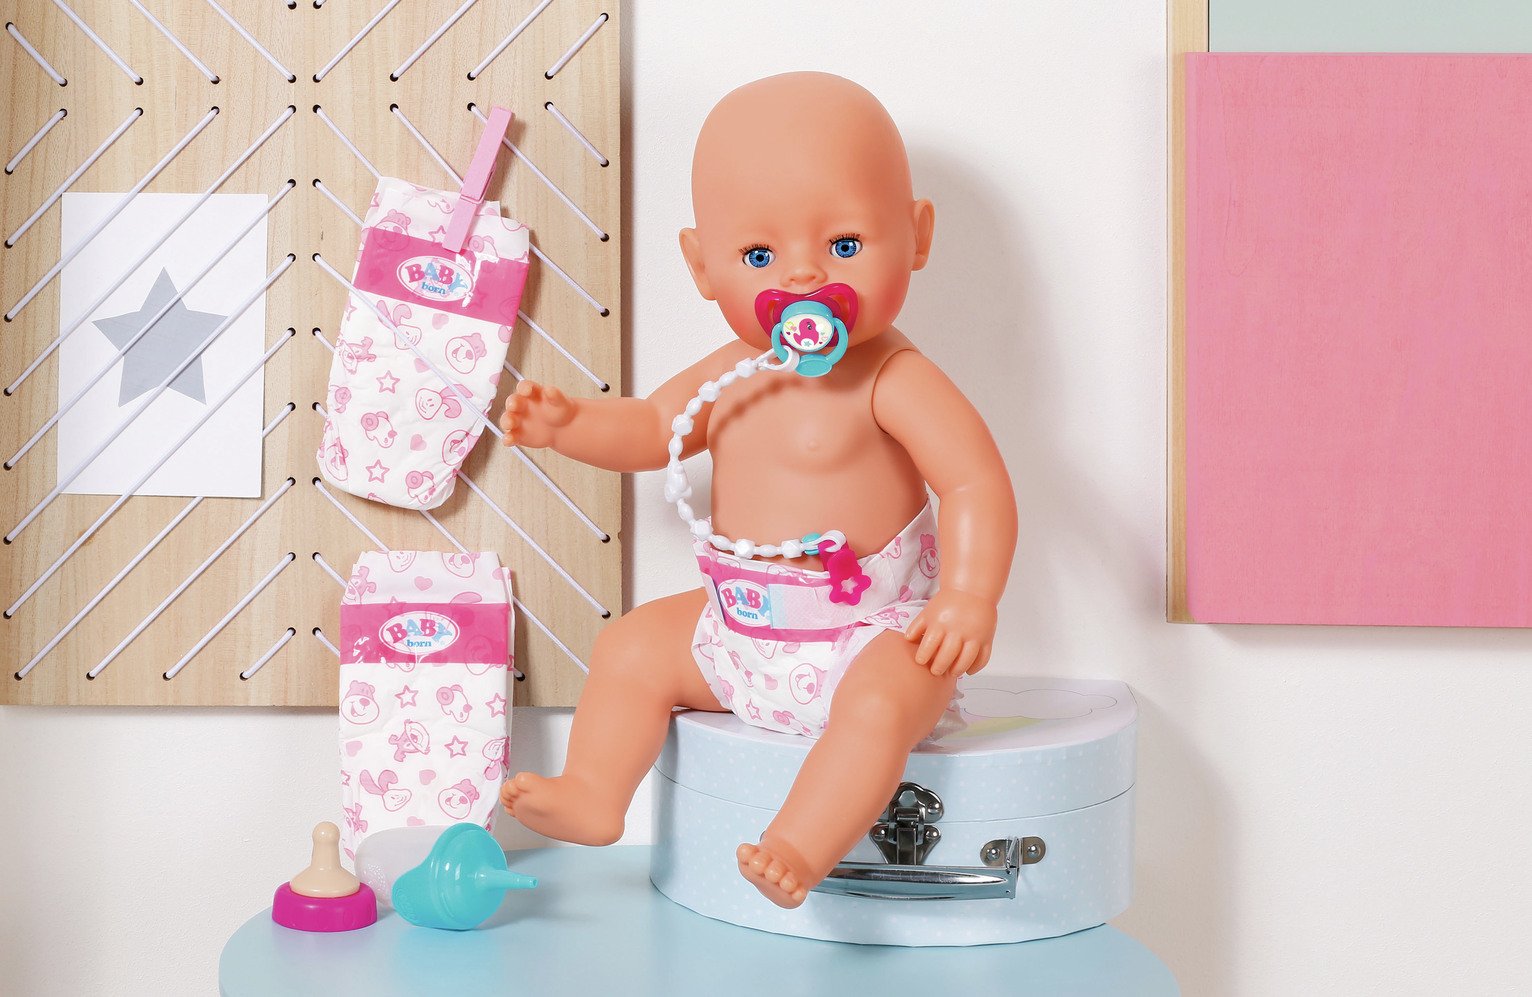 baby annabell deluxe special care set argos